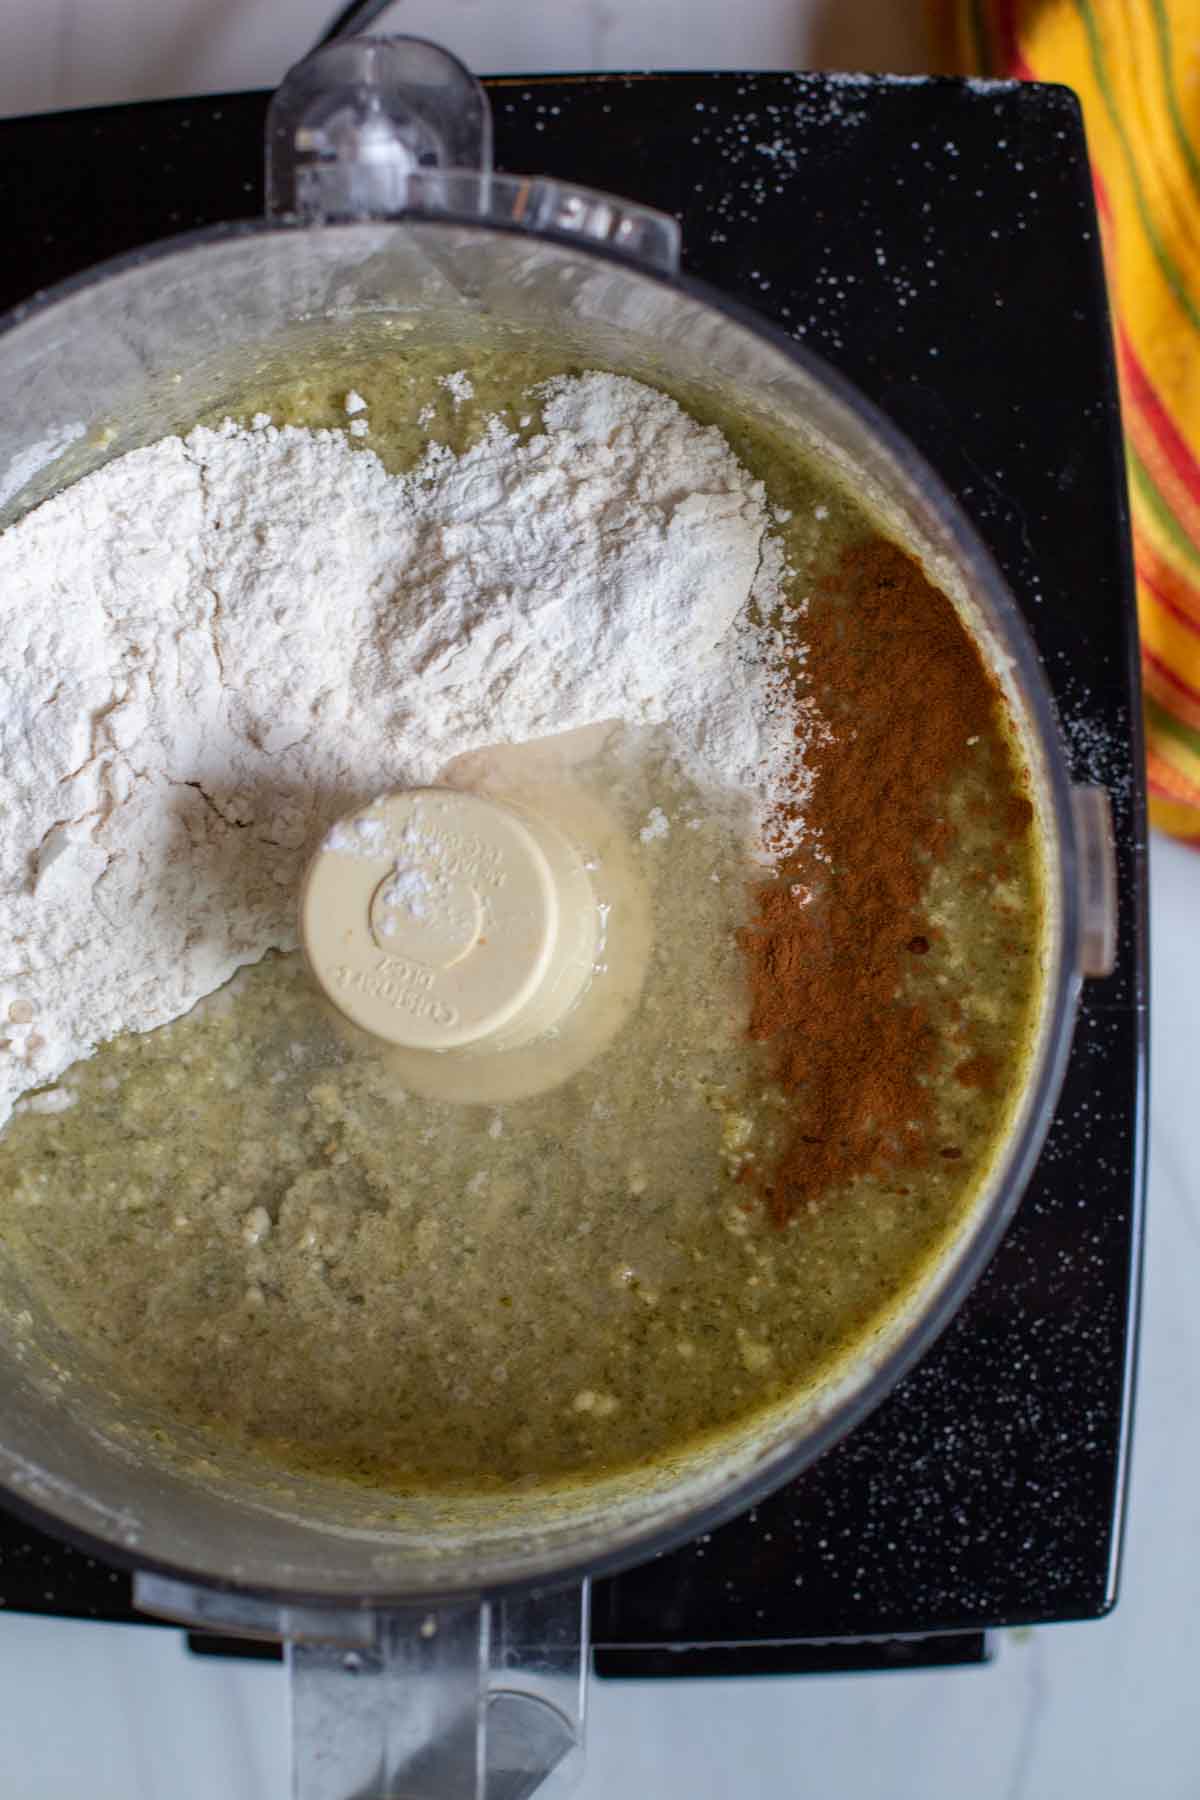 Adding flour and cinnamon to make a Mexican chocolate cake in a food processor.